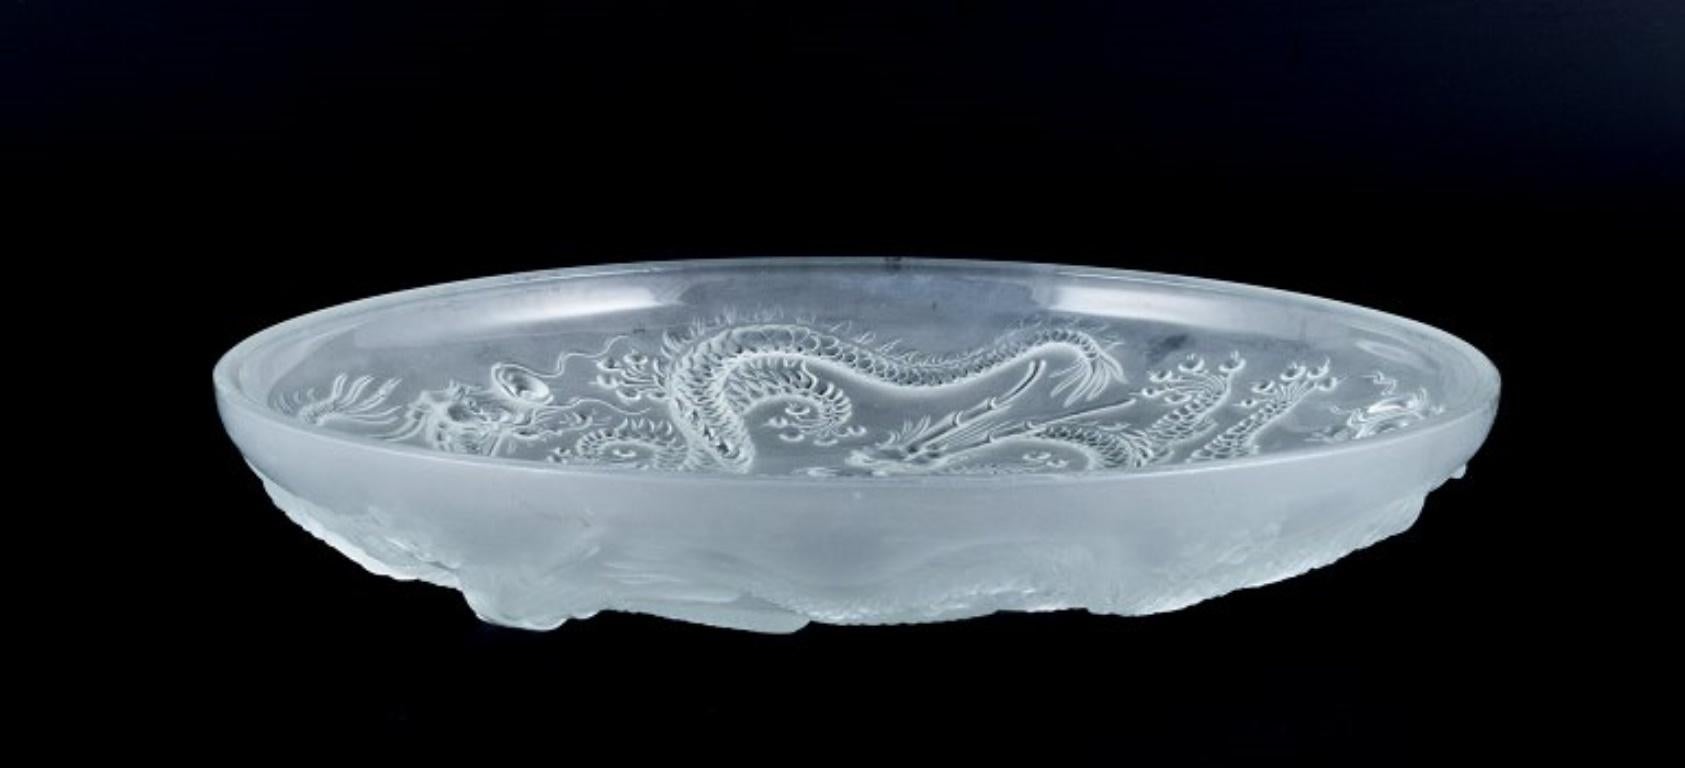 Josef Inwald, colossal Art Deco art glass bowl in Barolac glass.
Designed with dragons in an oriental style.
From the 1930s/40s.
In excellent condition with minimal signs of use.
Dimensions: Diameter 35.2 cm x Height 4.5 cm.